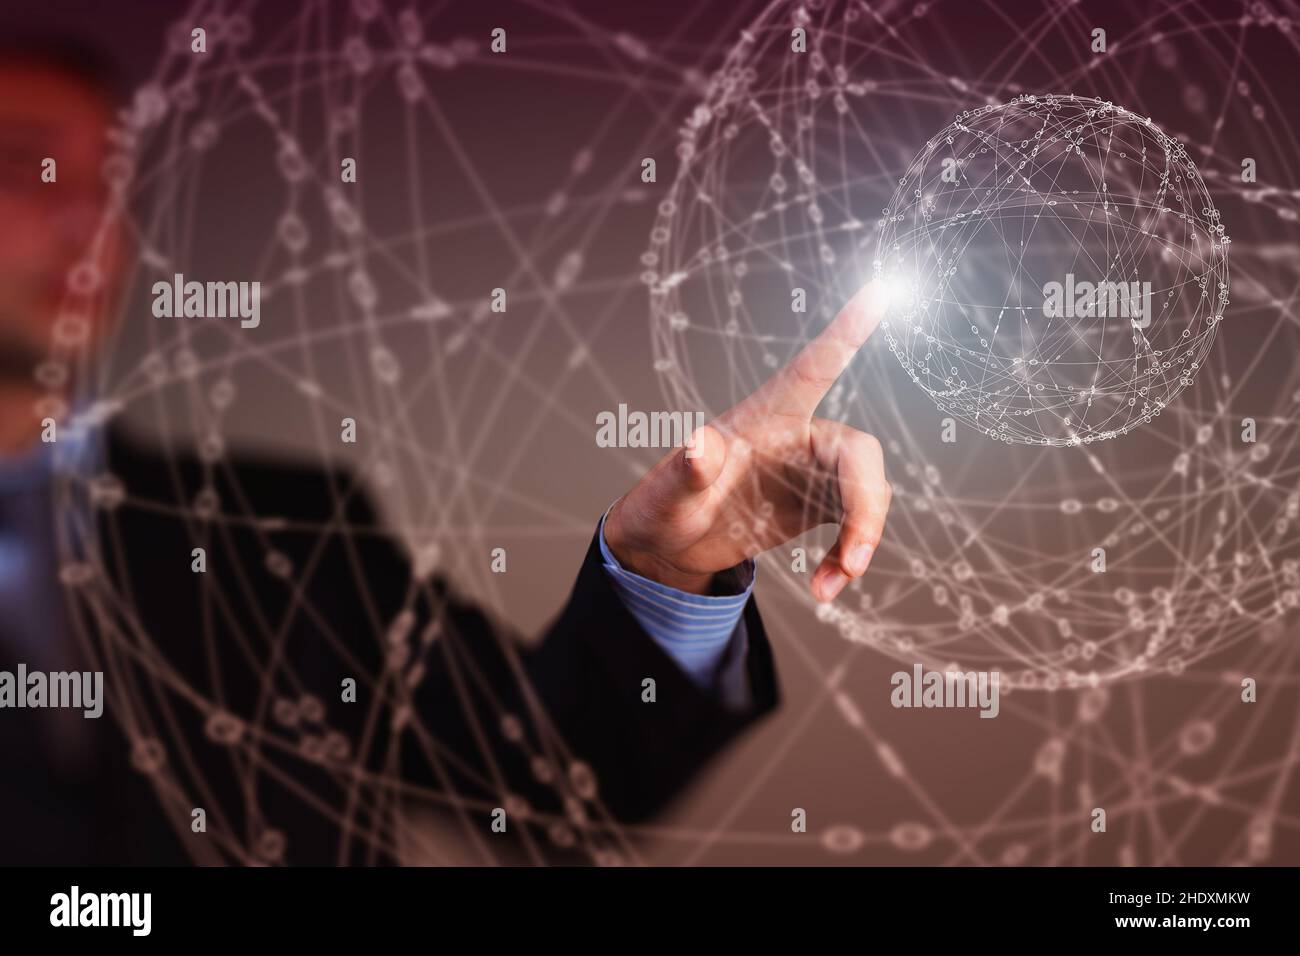 net, networked, virtual, nets, networkeds, virtuals Stock Photo